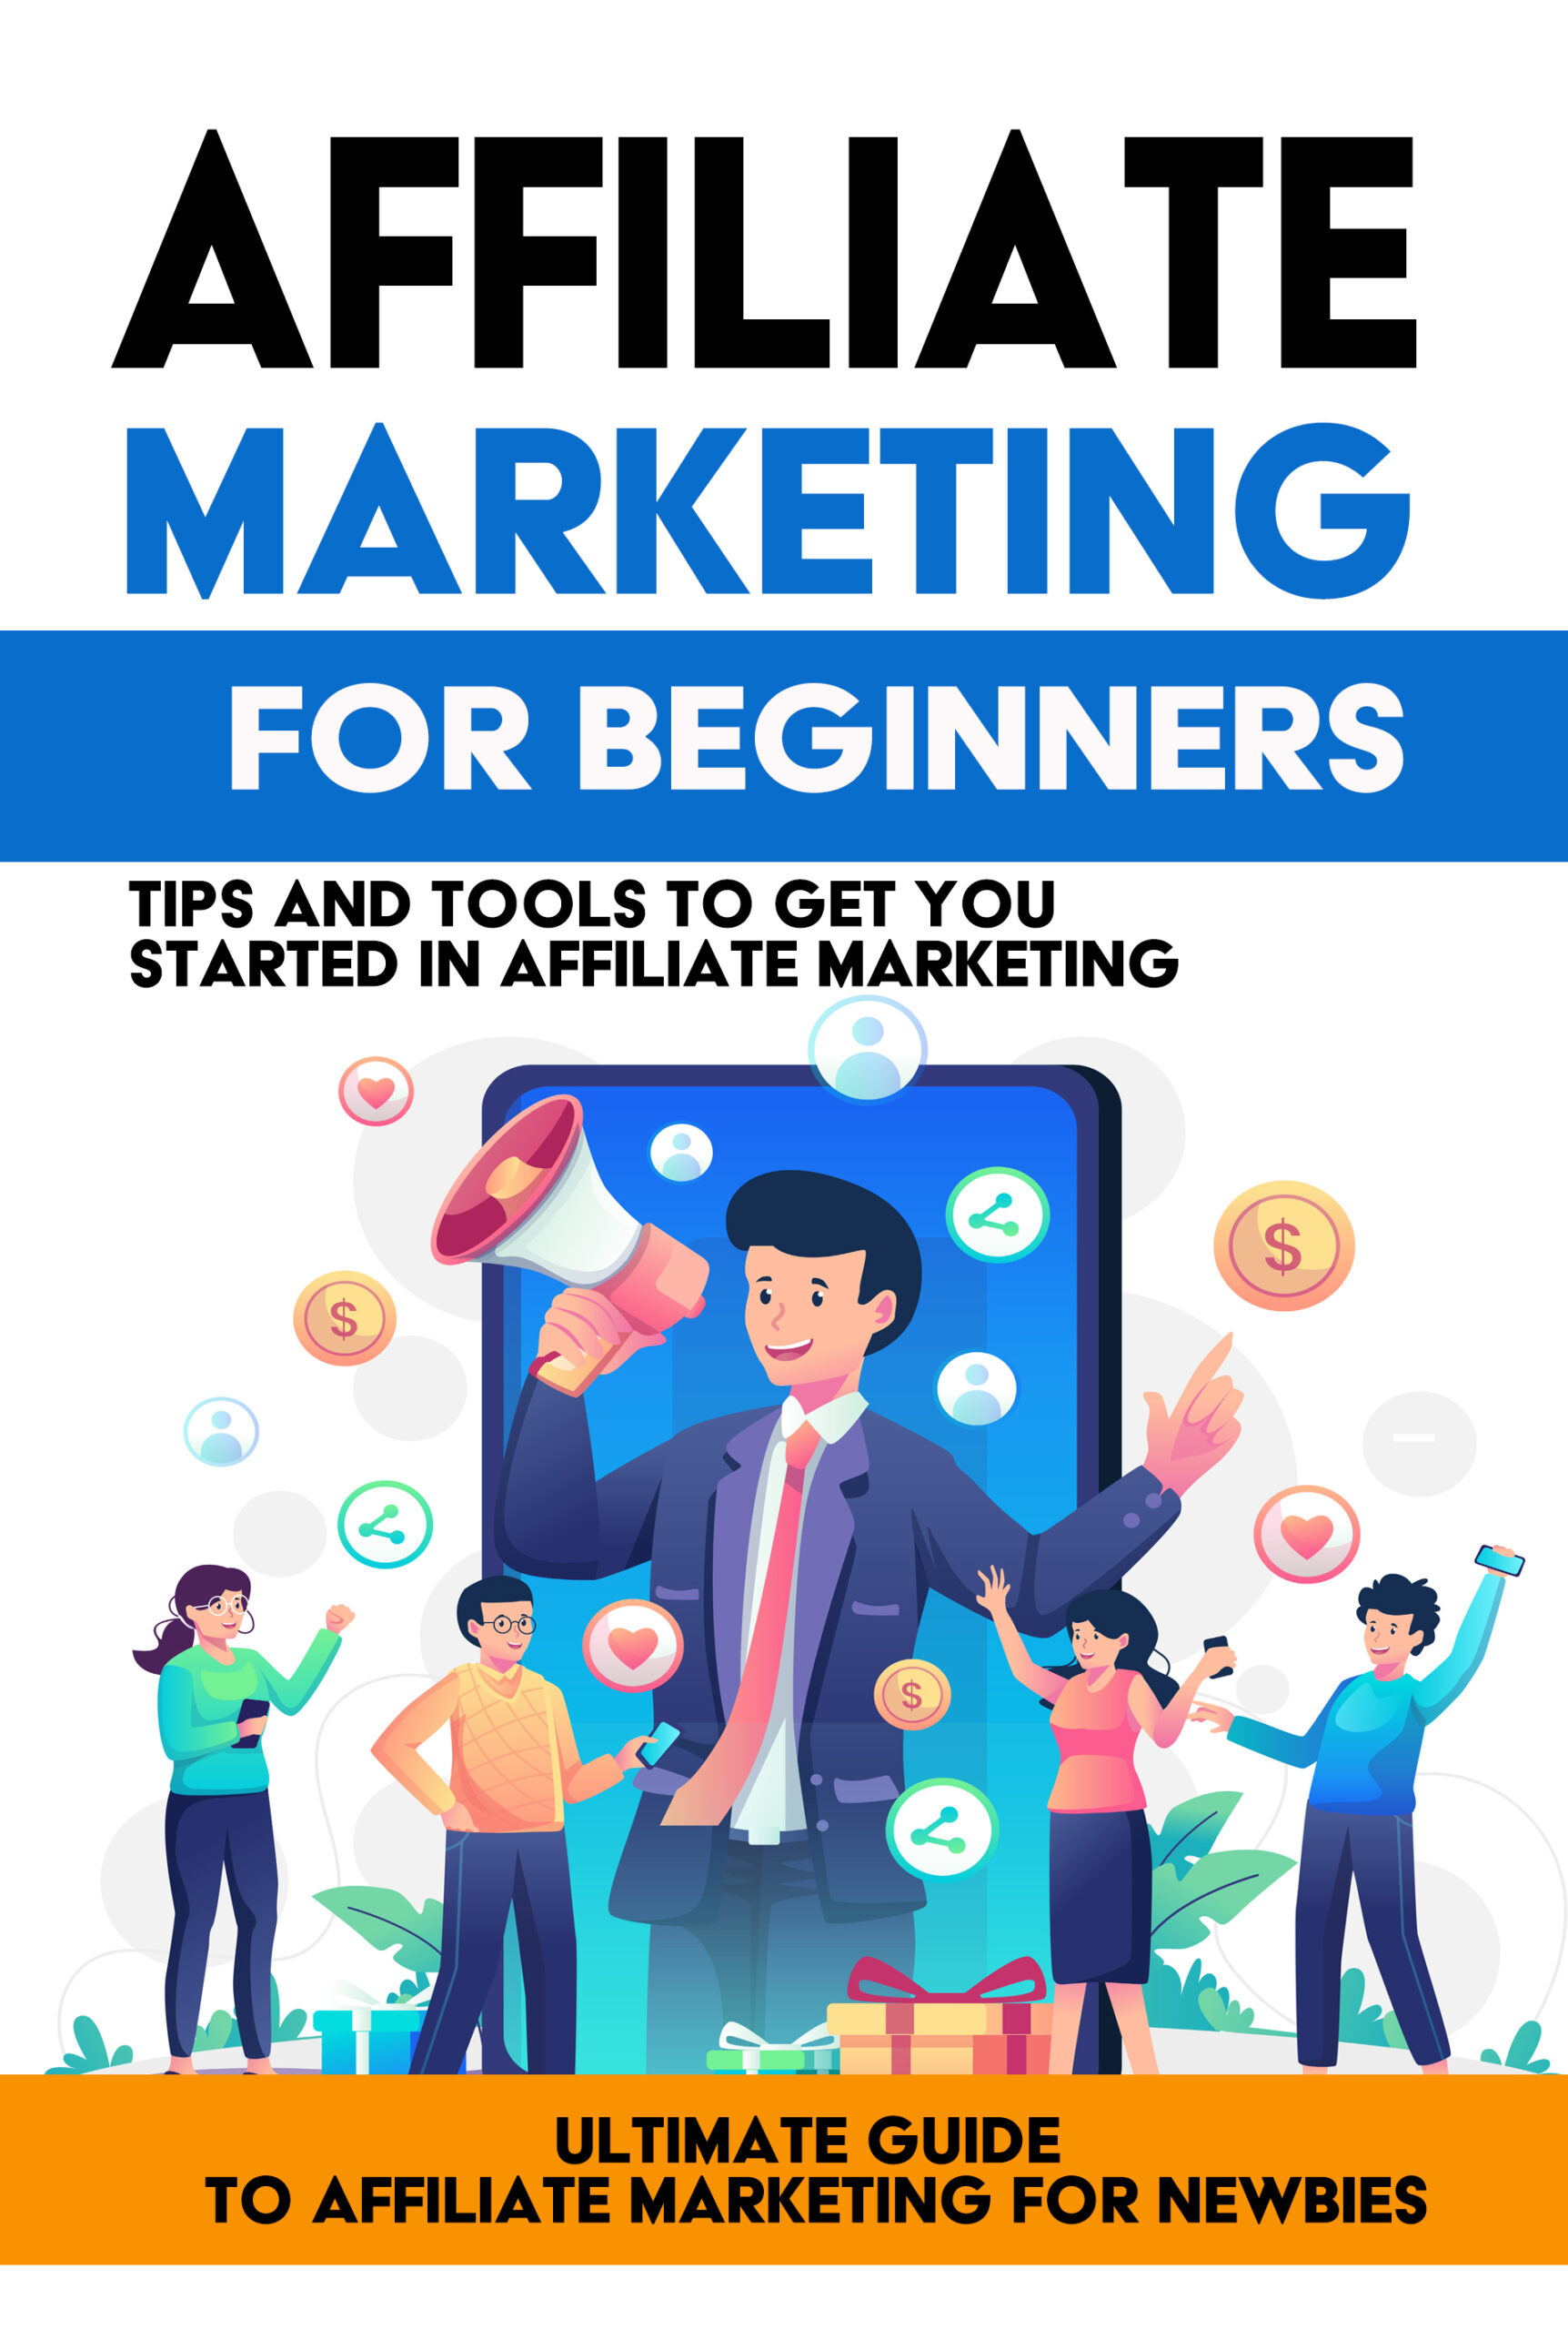 affiliate-marketing-for-beginners-kindle-cover-scaled Introduction to Affiliate Marketing: Best Practices for Promoting Affiliate Products